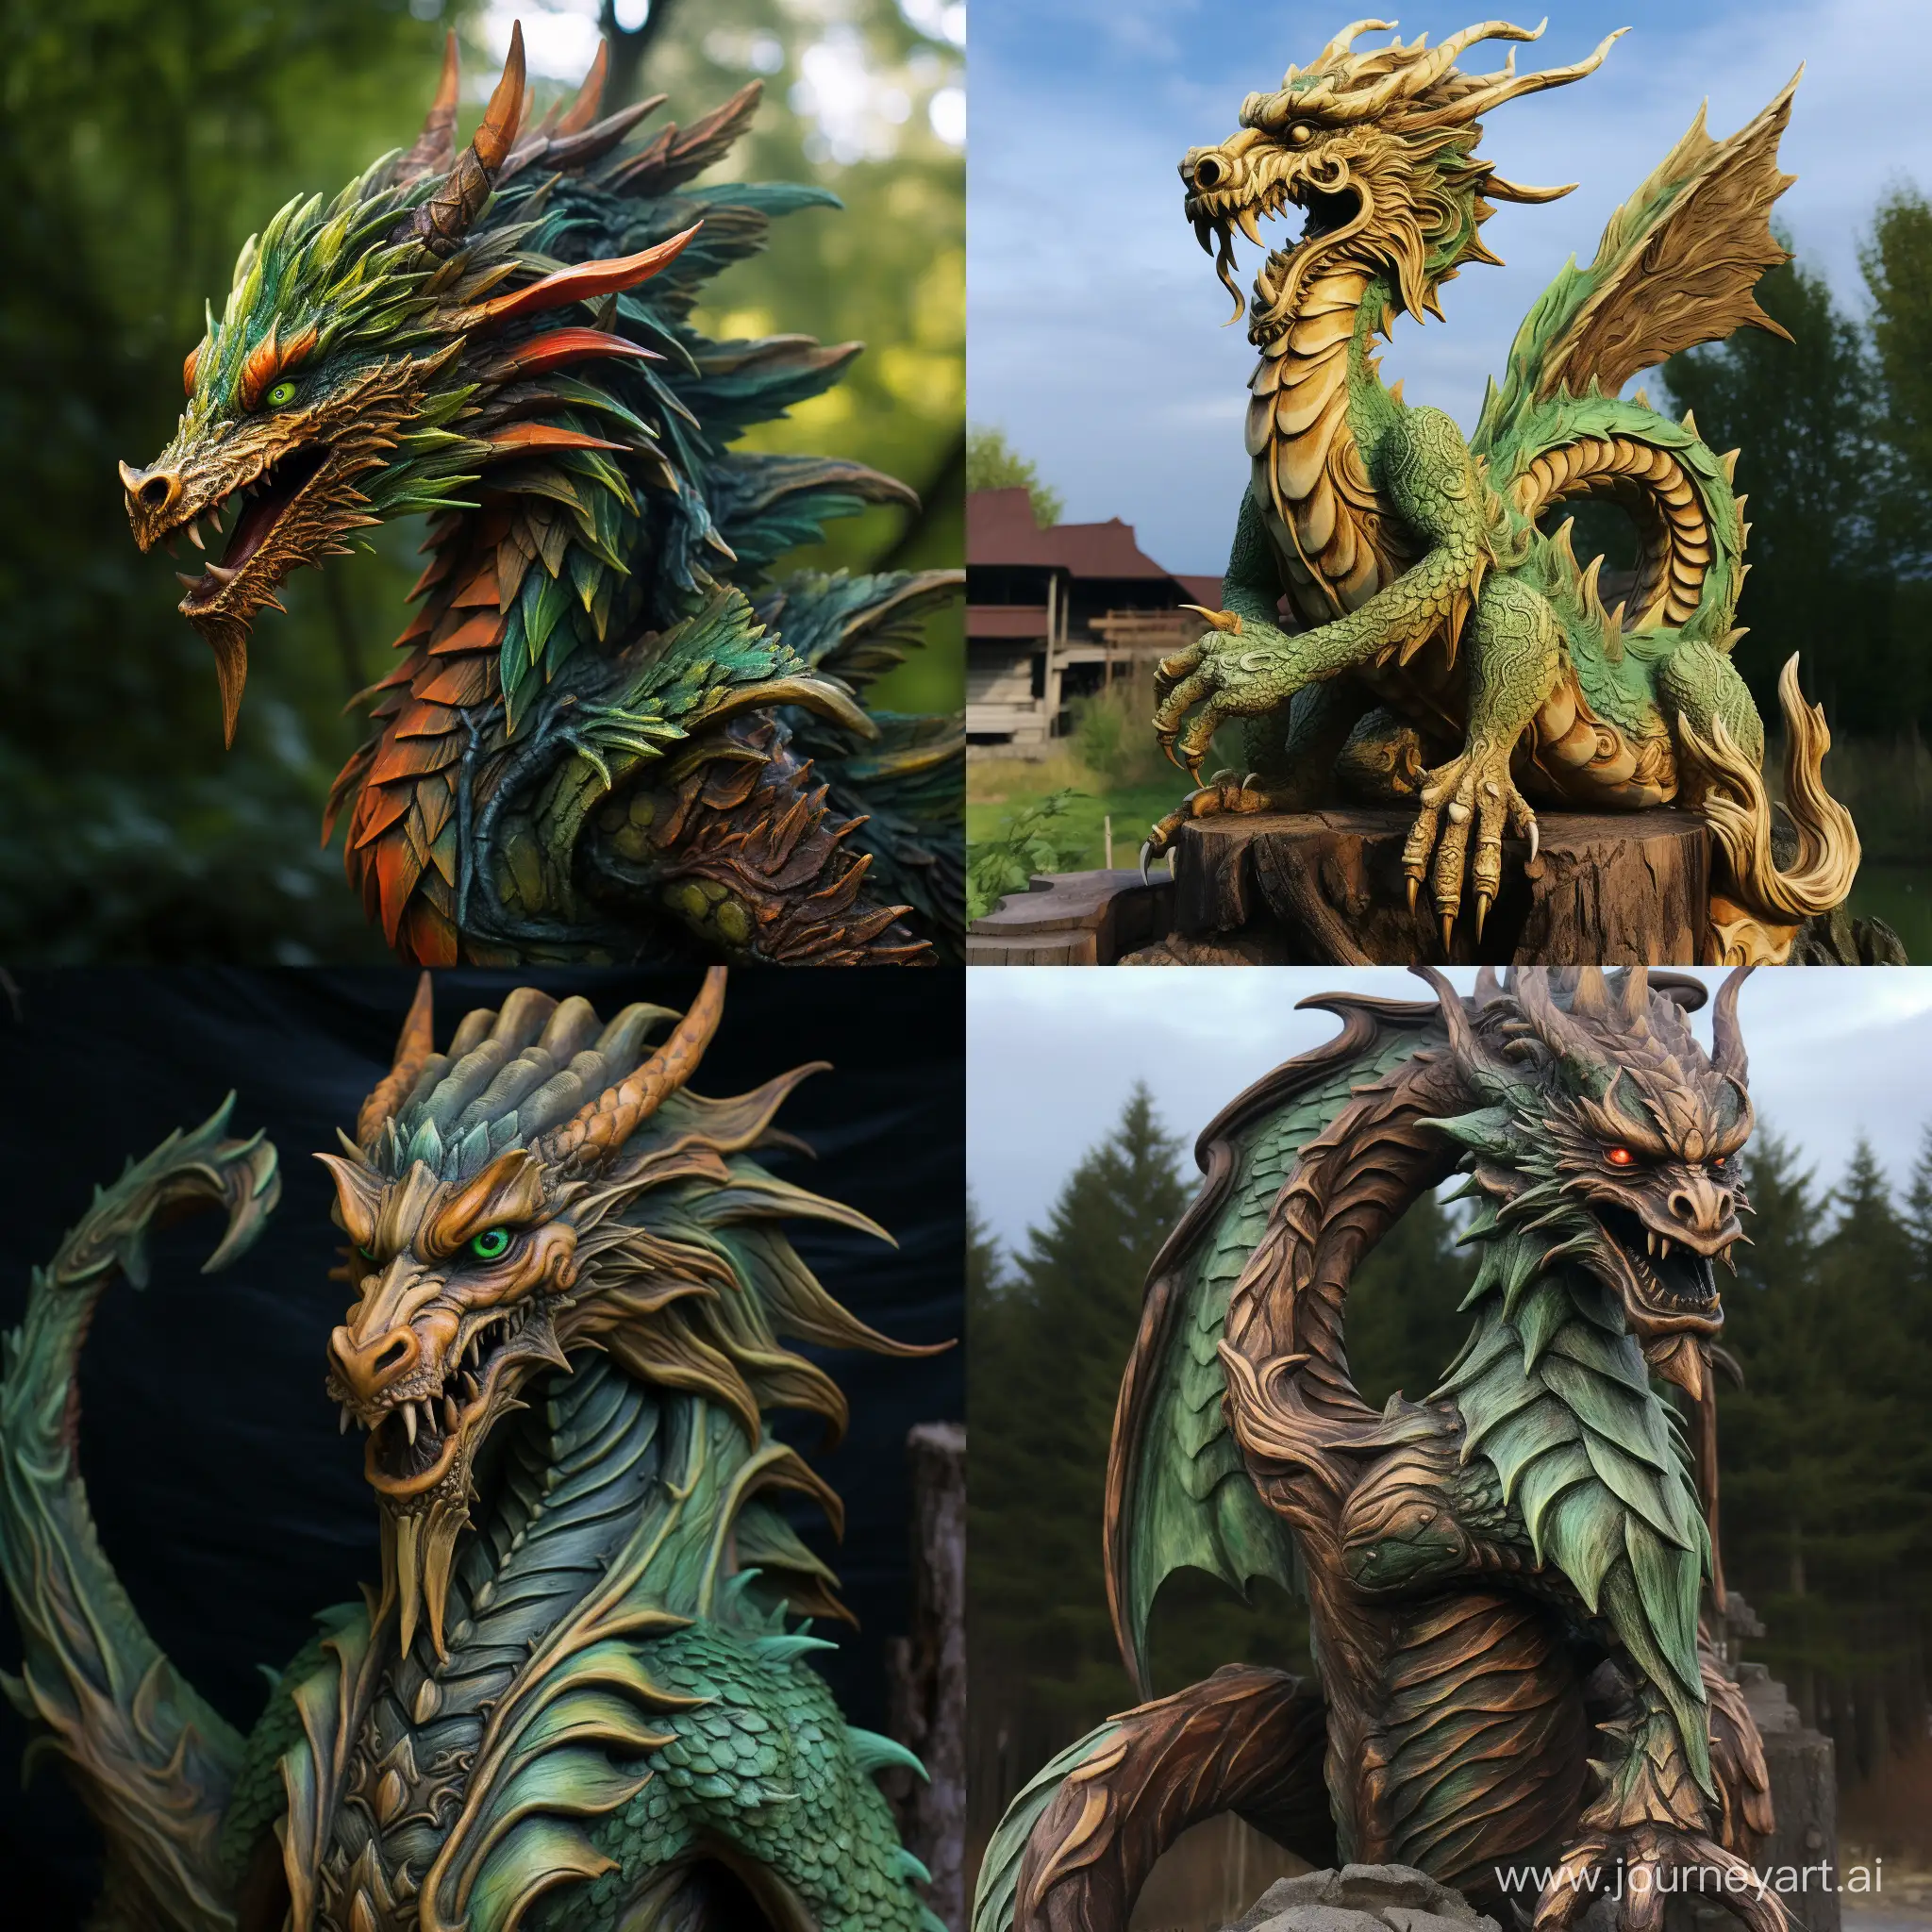 A real green beautiful hyperrealistic fiery wooden mighty dragon
